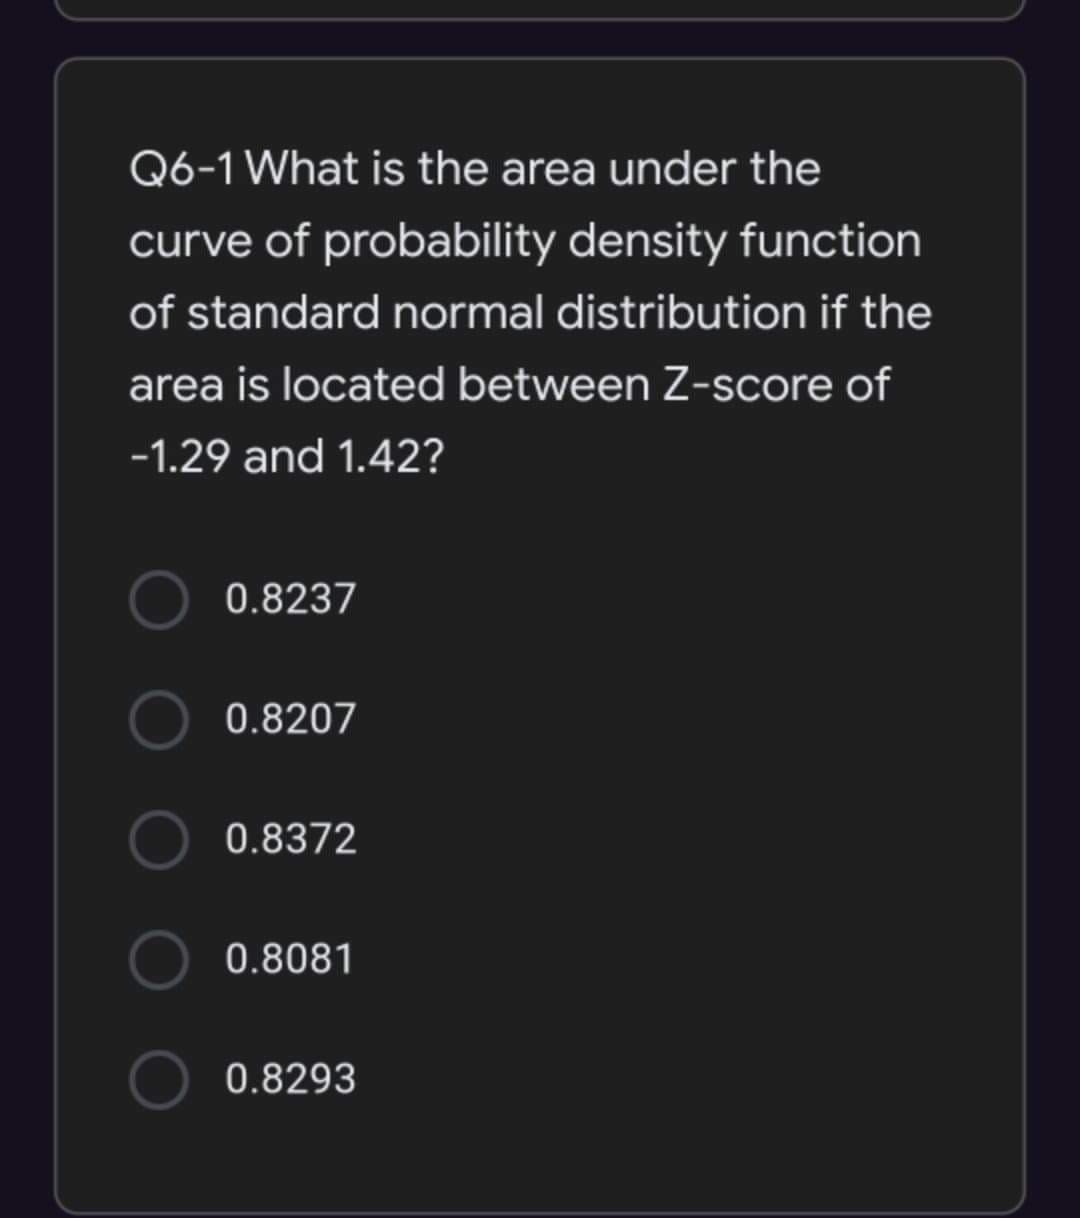 Q6-1What is the area under the
curve of probability density function
of standard normal distribution if the
area is located between Z-score of
-1.29 and 1.42?
